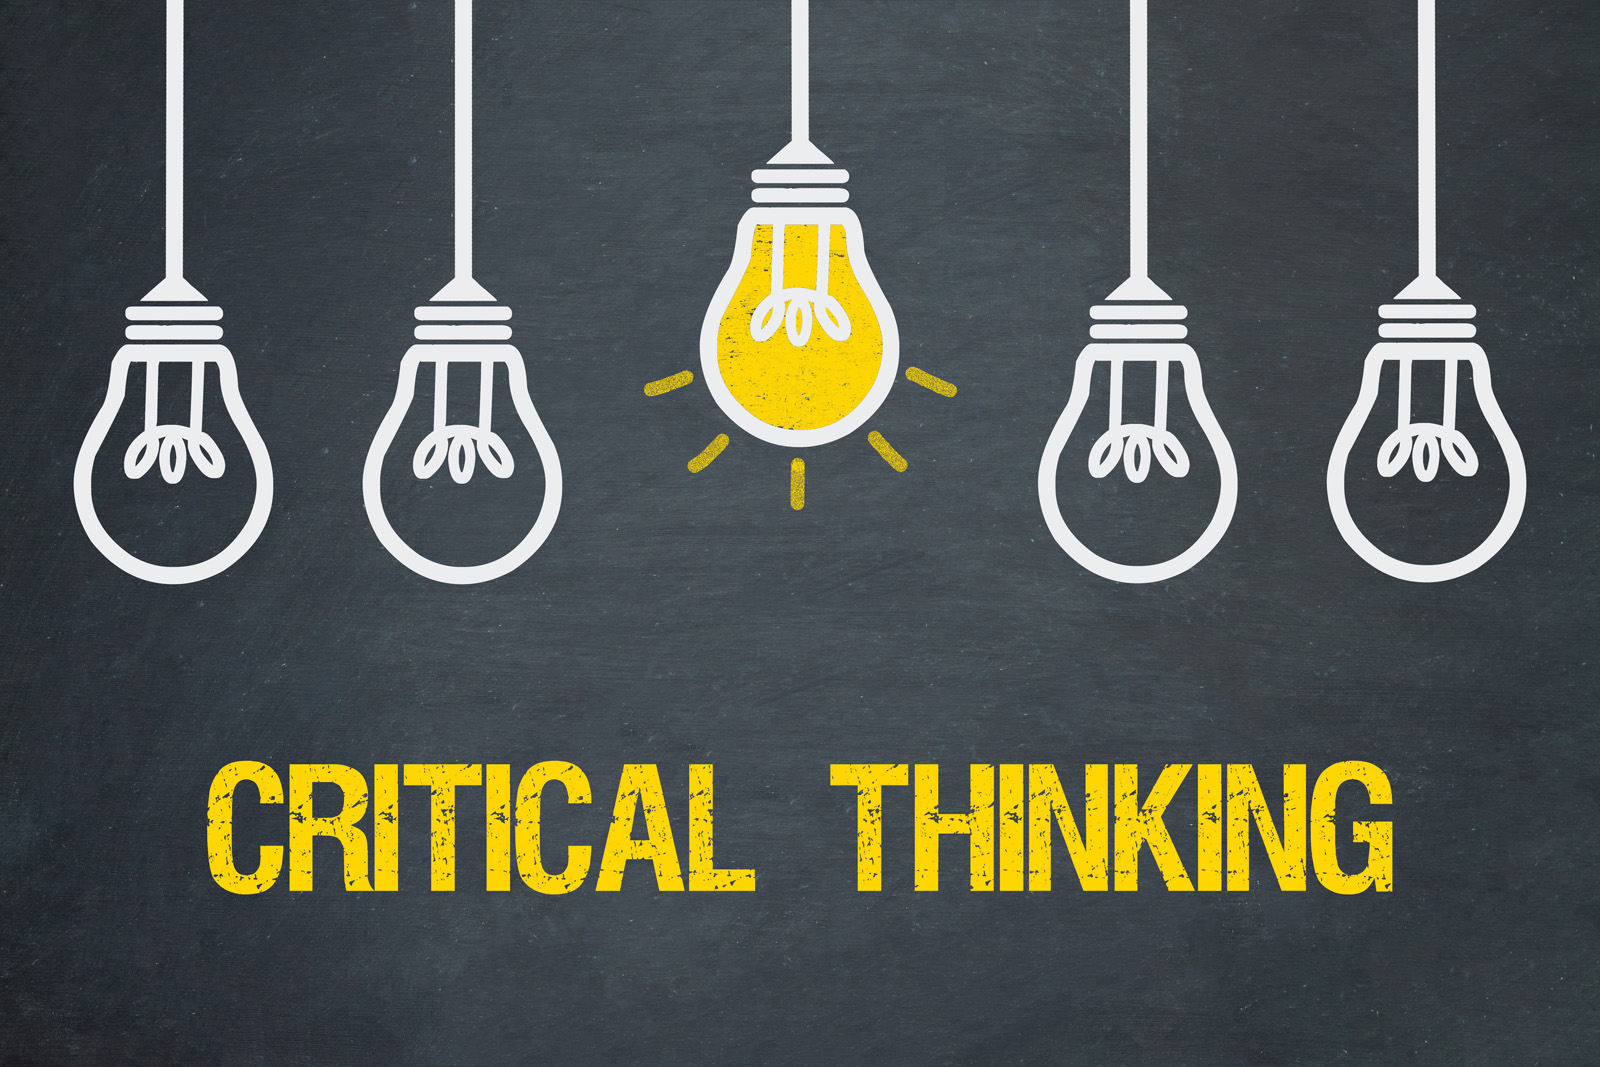 best online critical thinking course